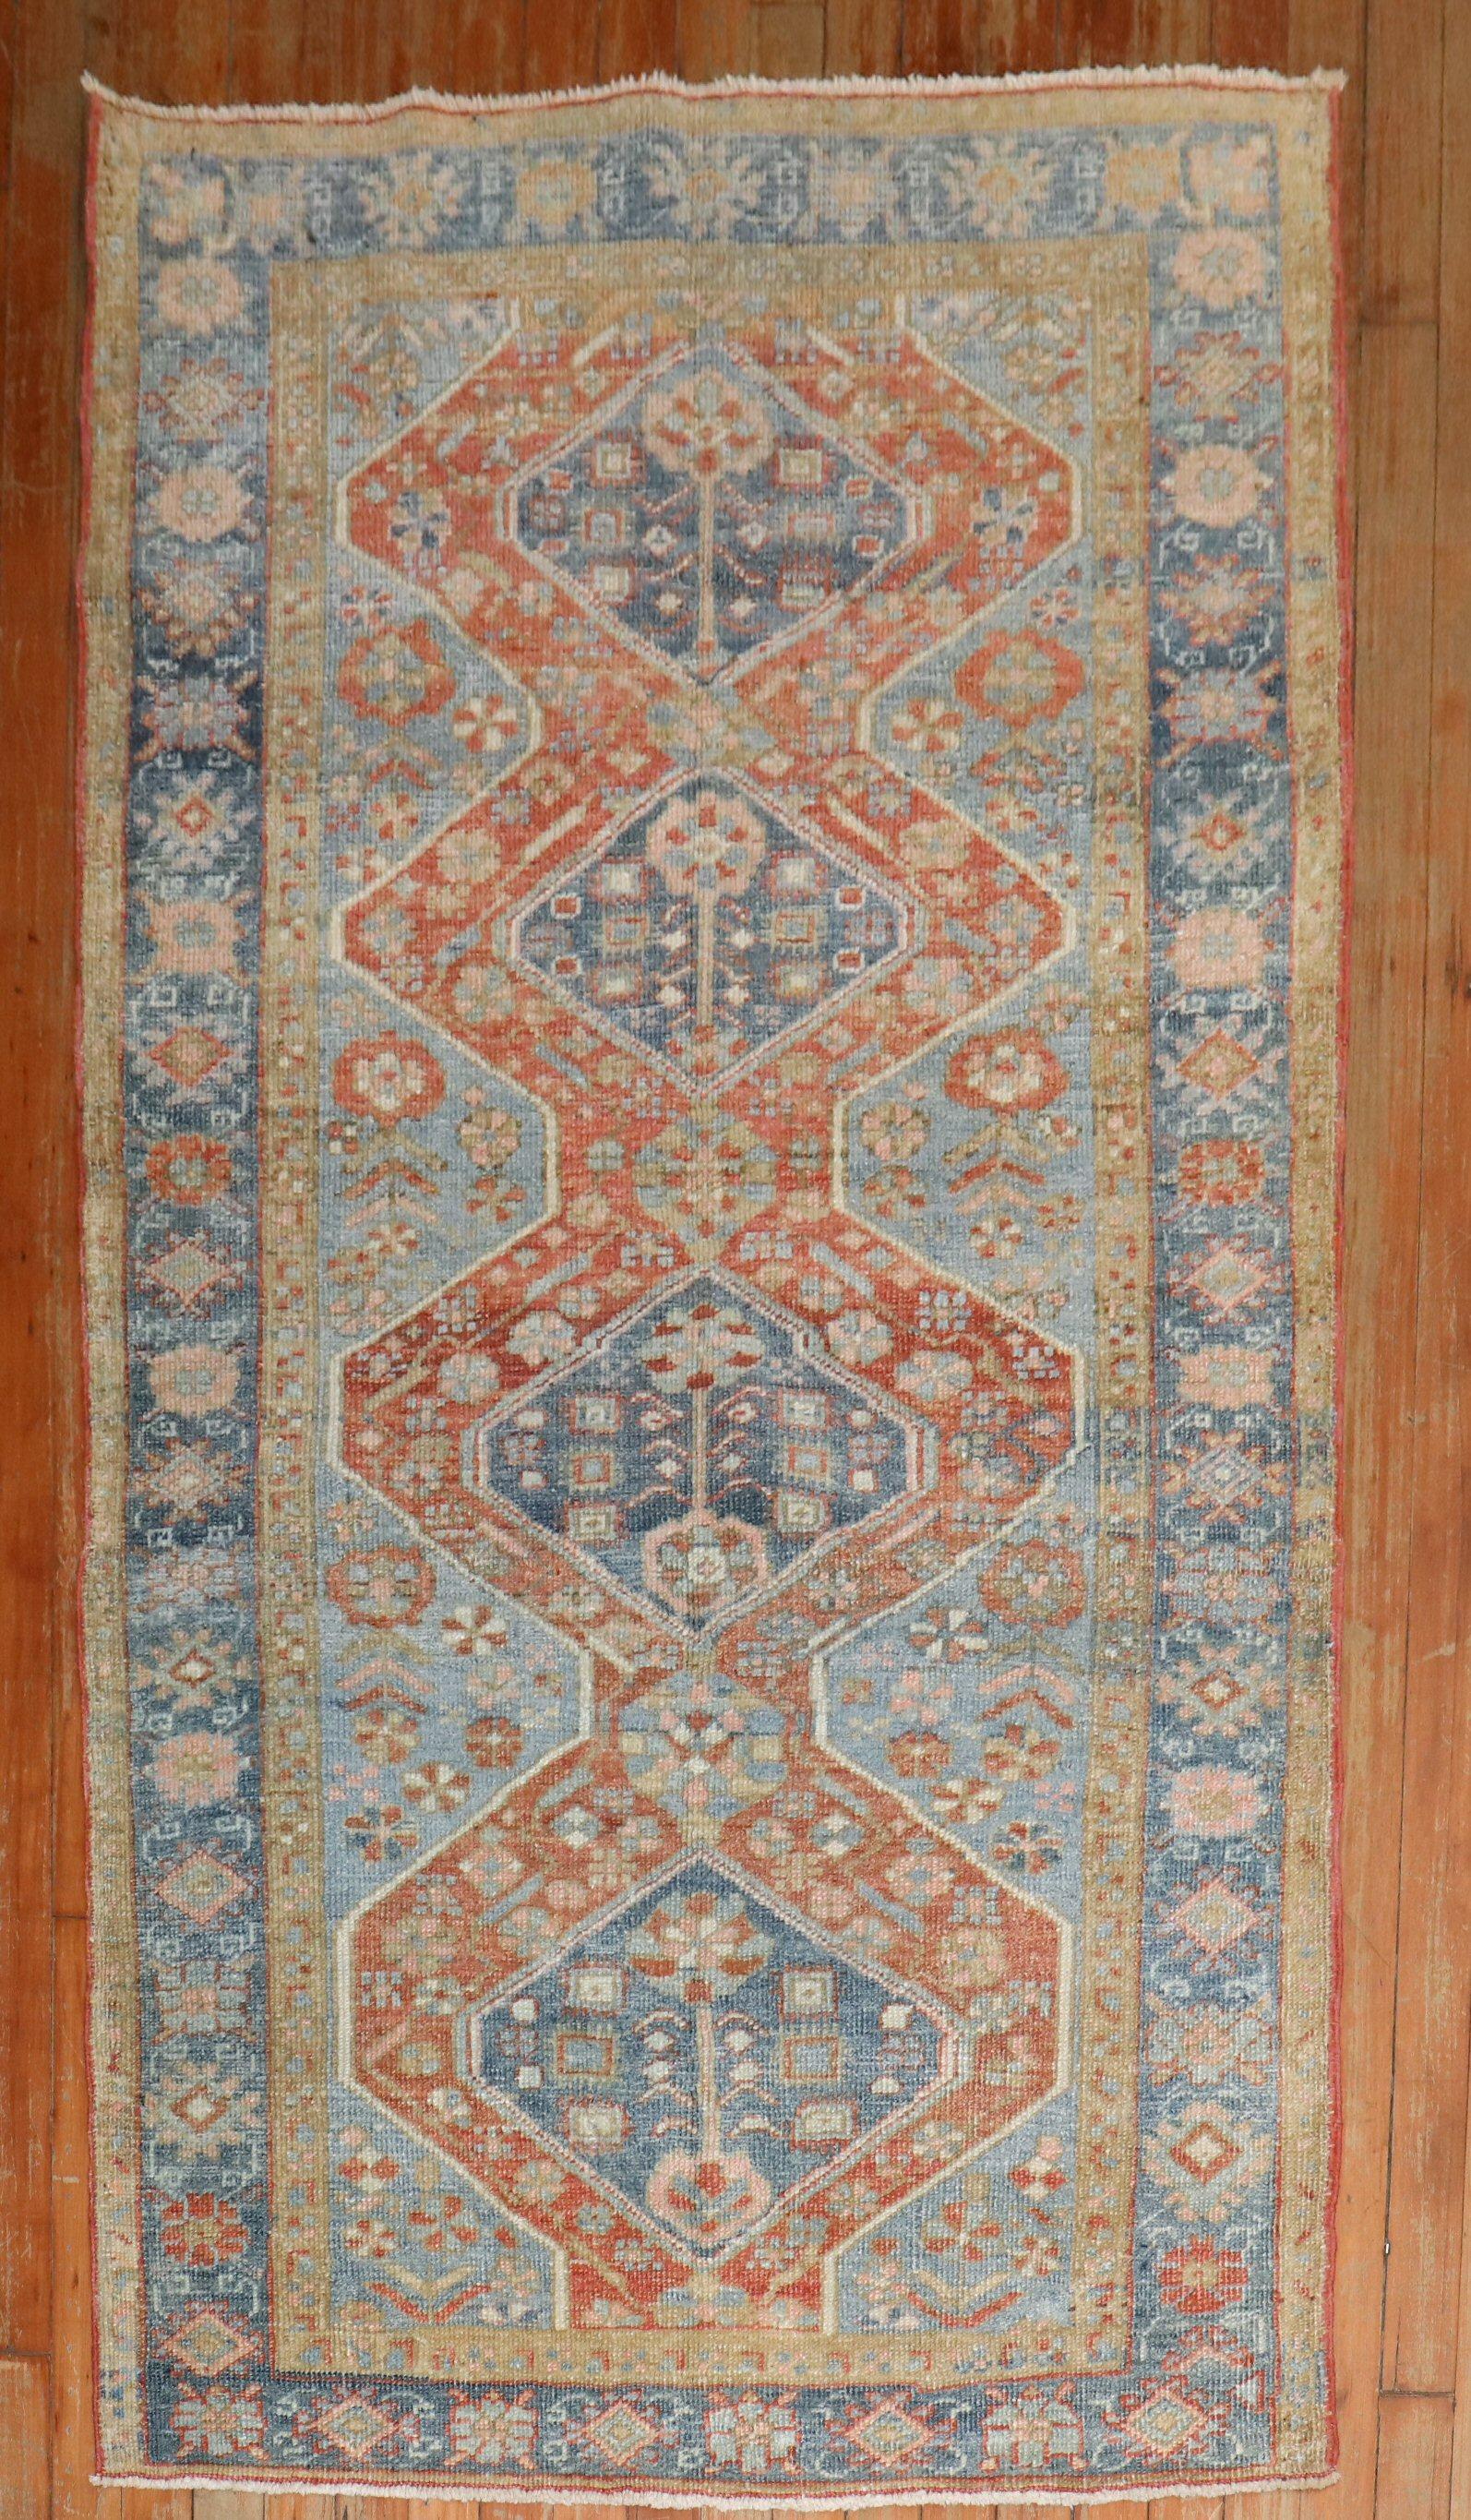 A Persian Heriz Rug from the early 20th Century

Measures: 3'2” x 5'9''